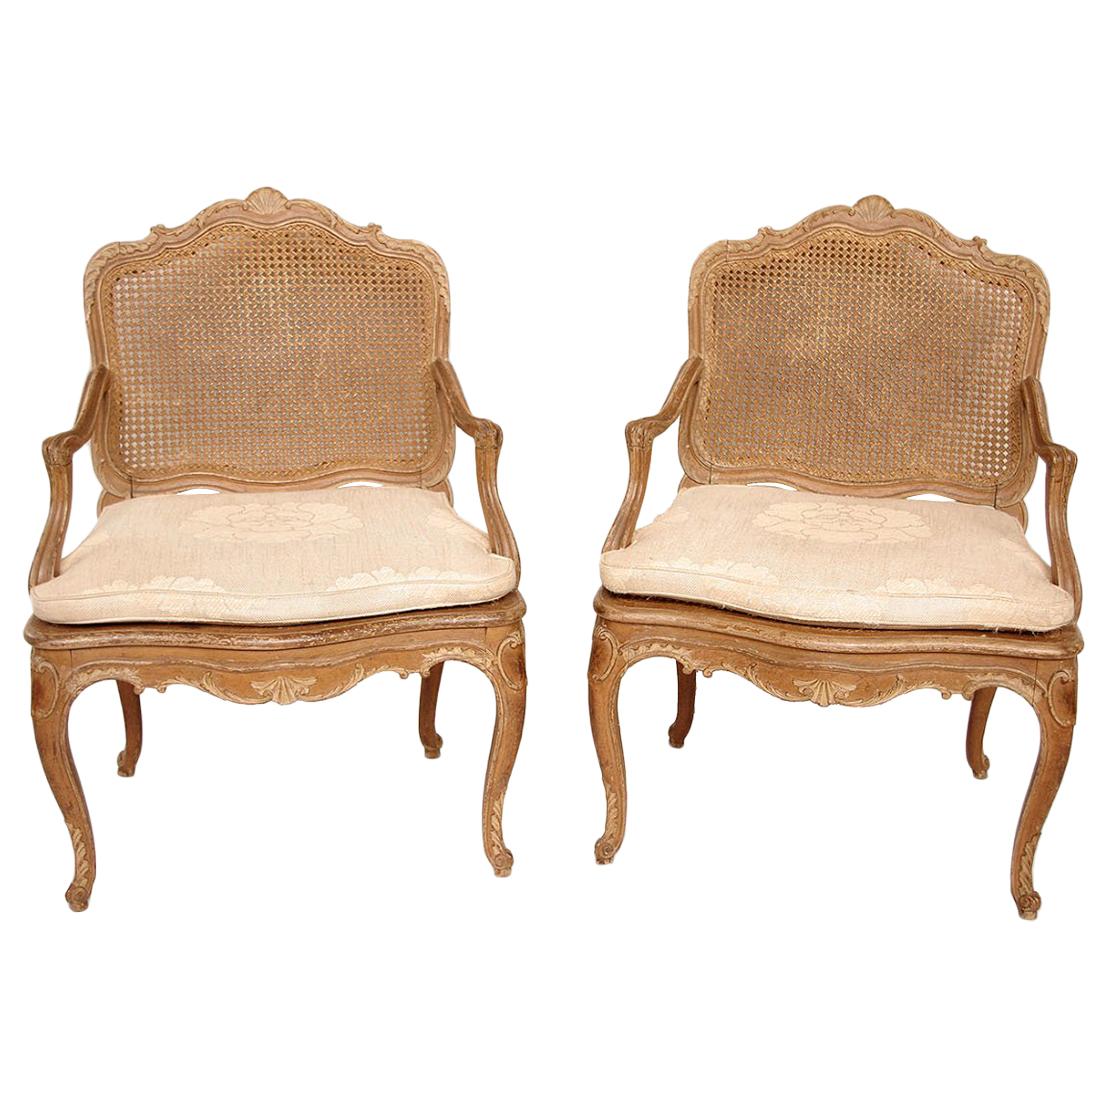 Pair of Canned Louis XV Style Armchairs in Cream Lacquered Wood, circa 1880